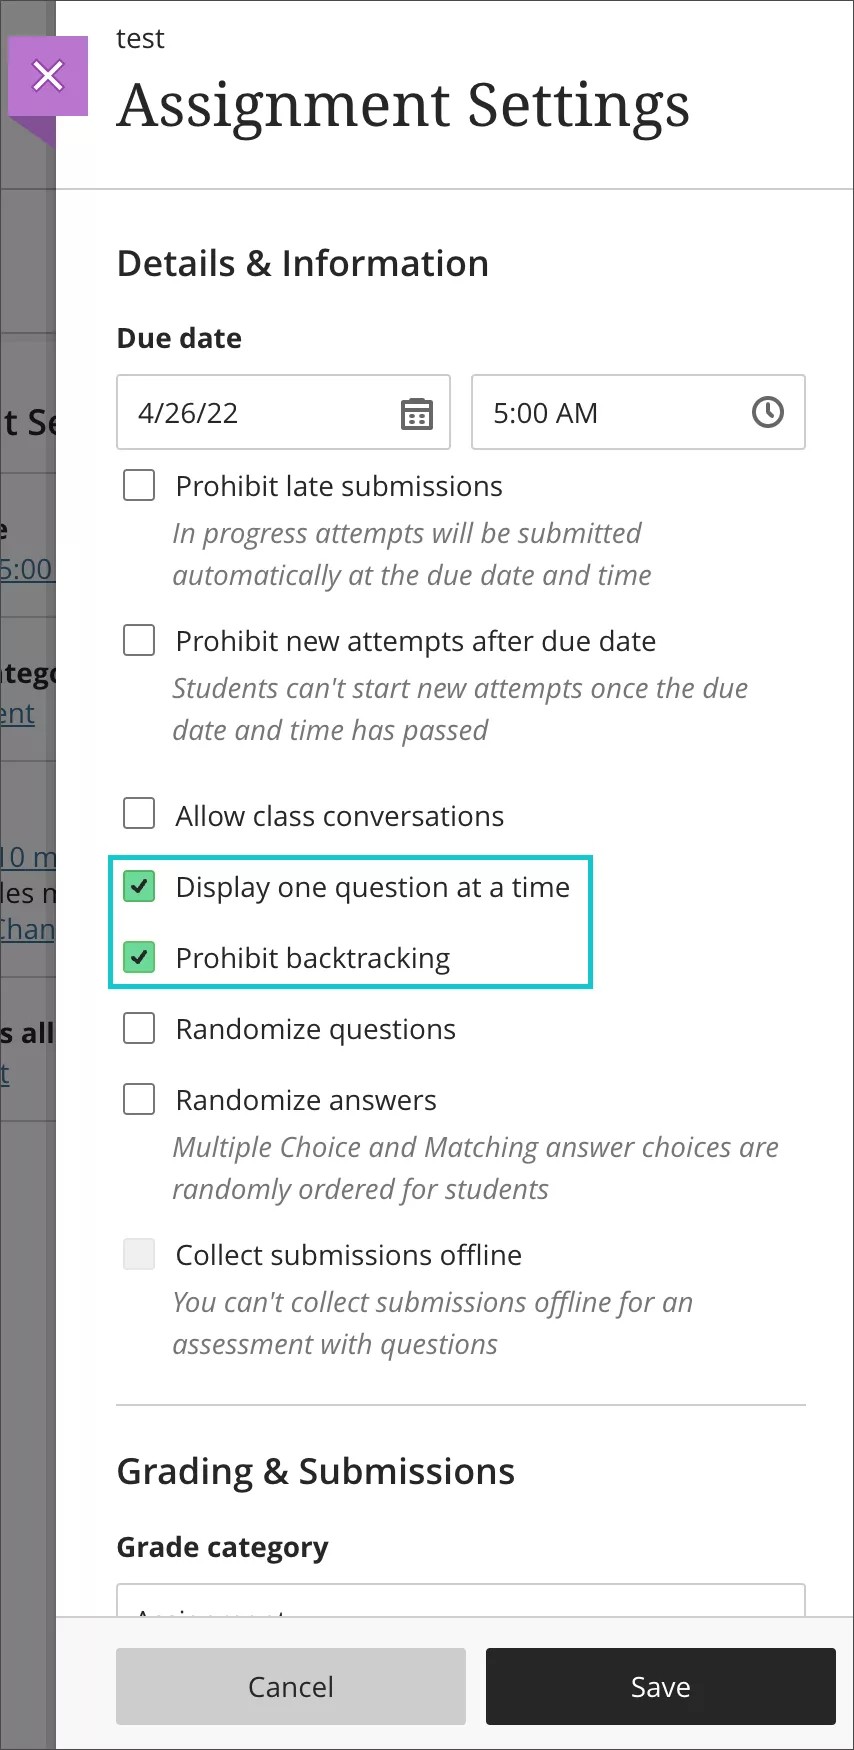 The boxes for display one question at a time and prohibited backtracking in assignment settings are ticked and highlighted. 